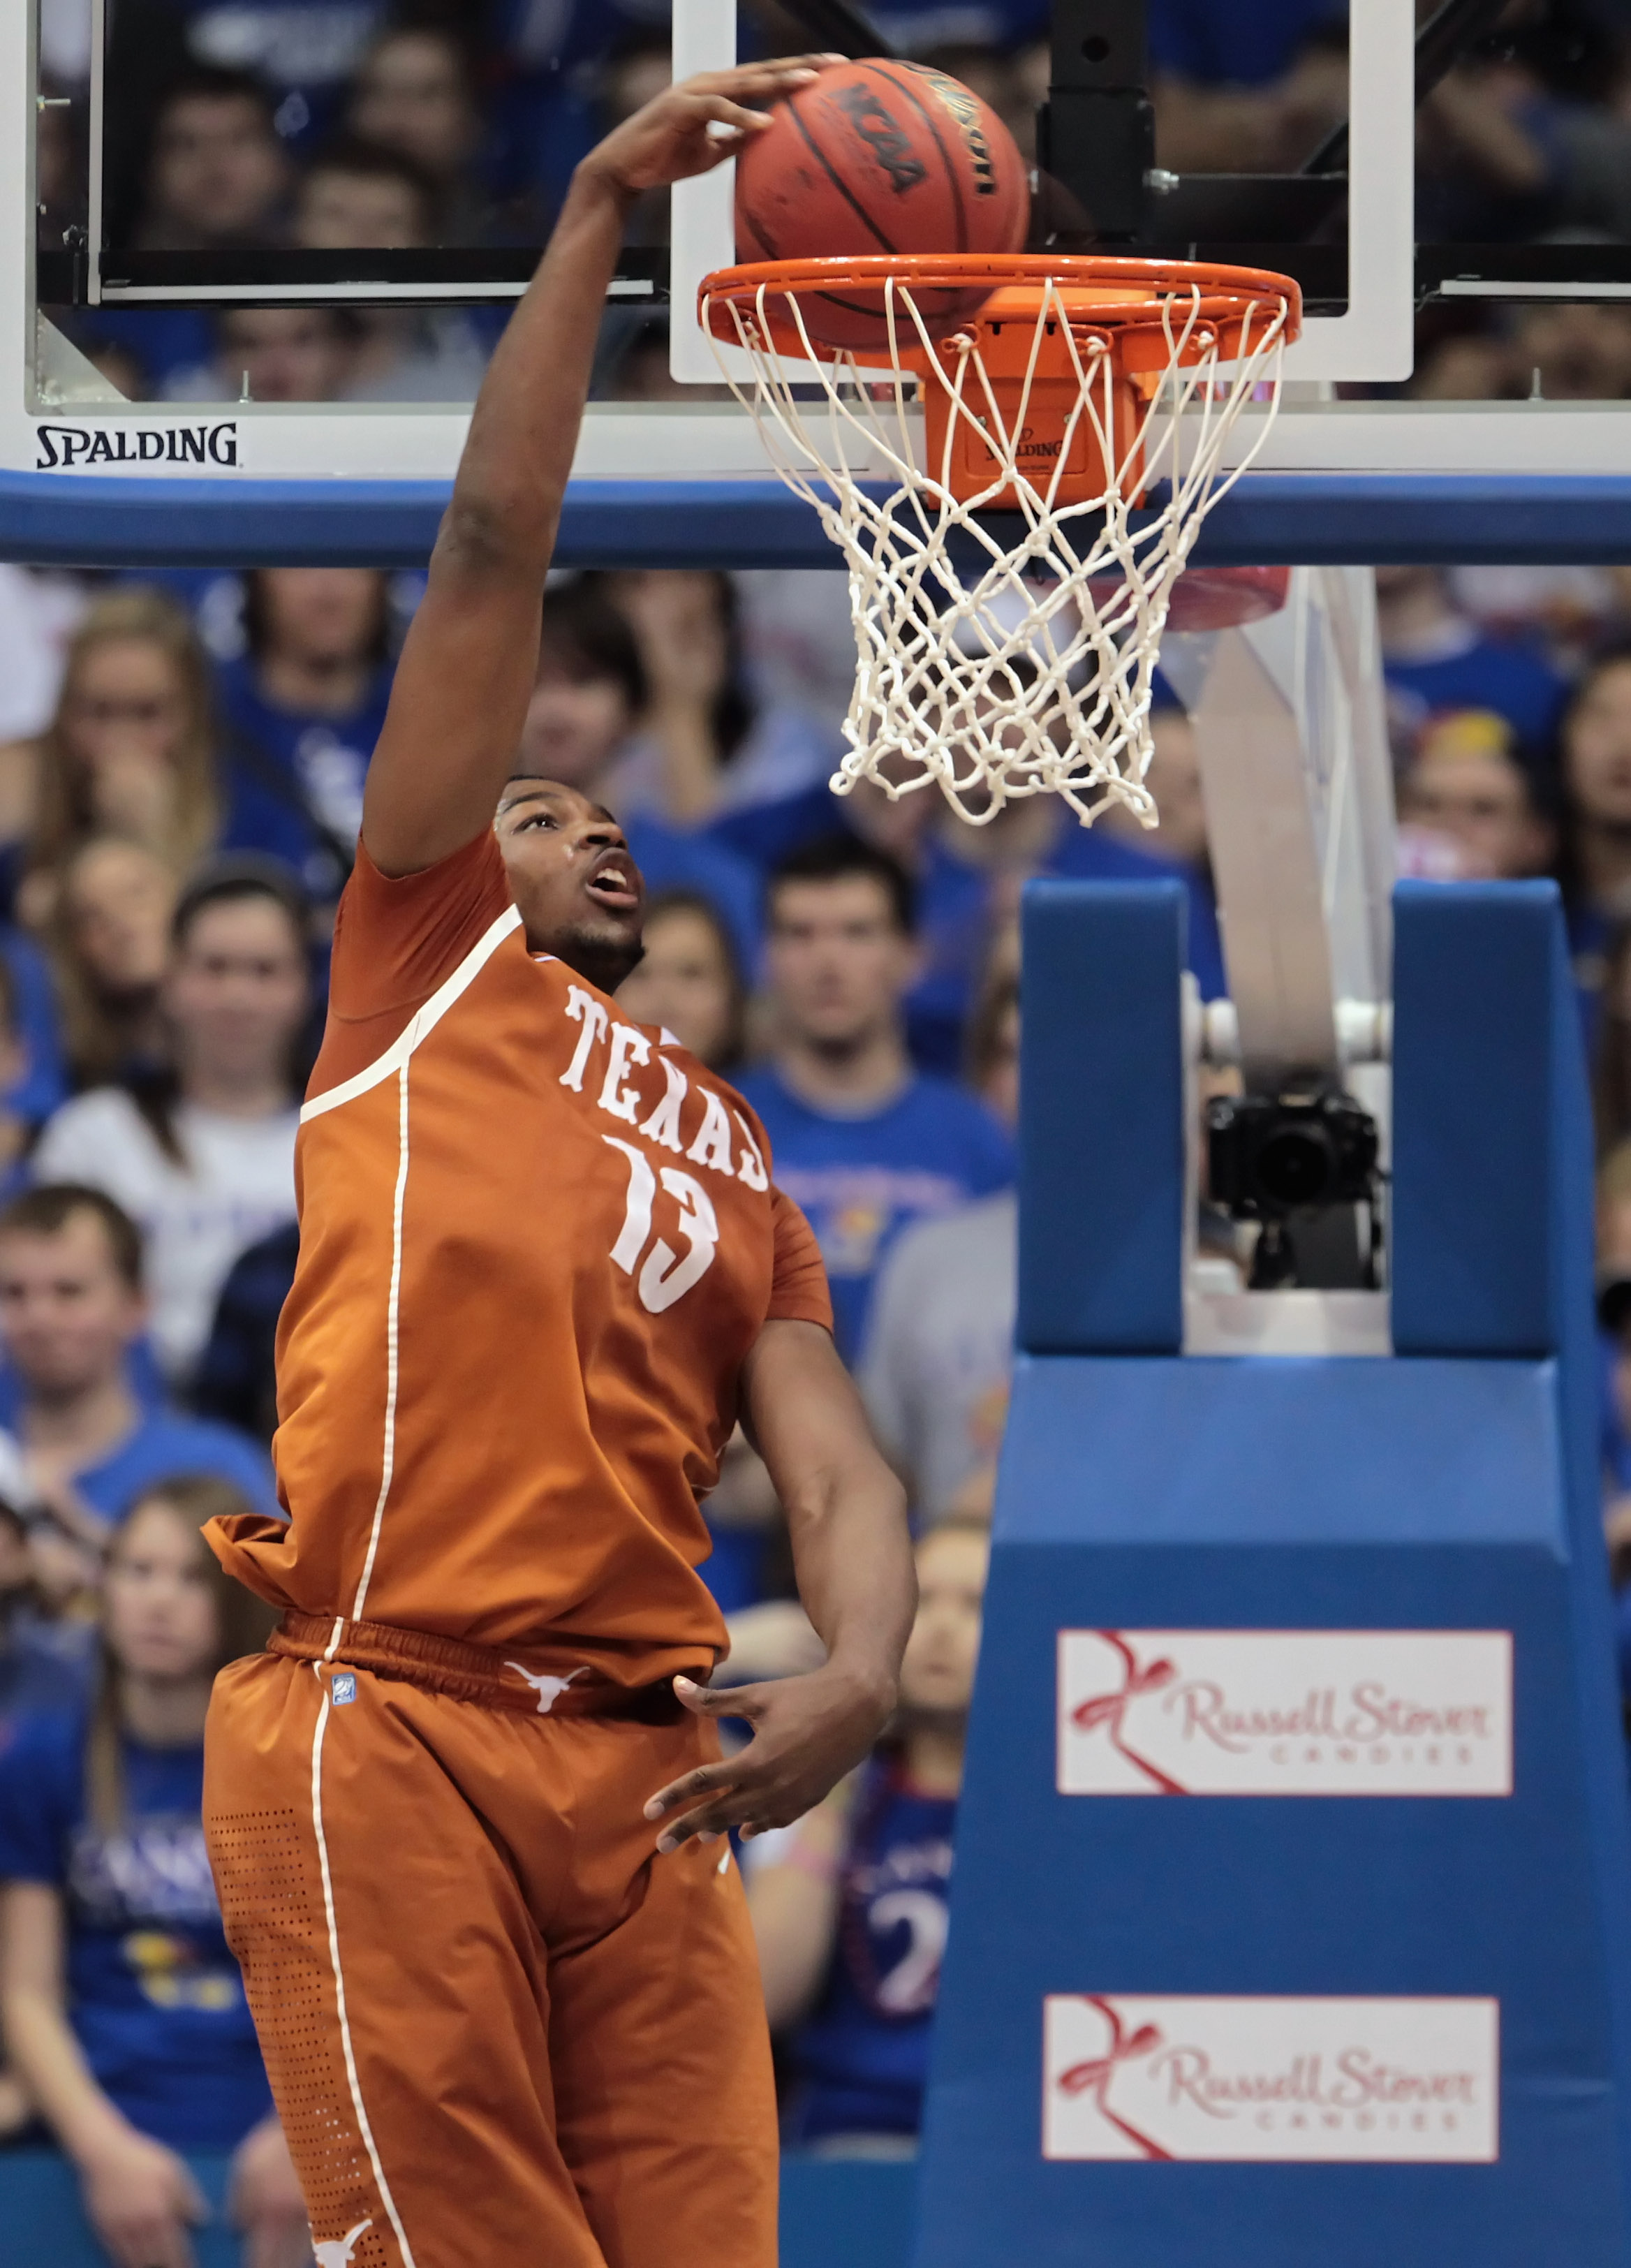 LAWRENCE, KS - JANUARY 22:  Tristan Thompson #13 of the Texas Longhorns dunks against the Kansas Jayhawks during the game on January 22, 2011 at Allen Fieldhouse in Lawrence, Kansas.  (Photo by Jamie Squire/Getty Images)